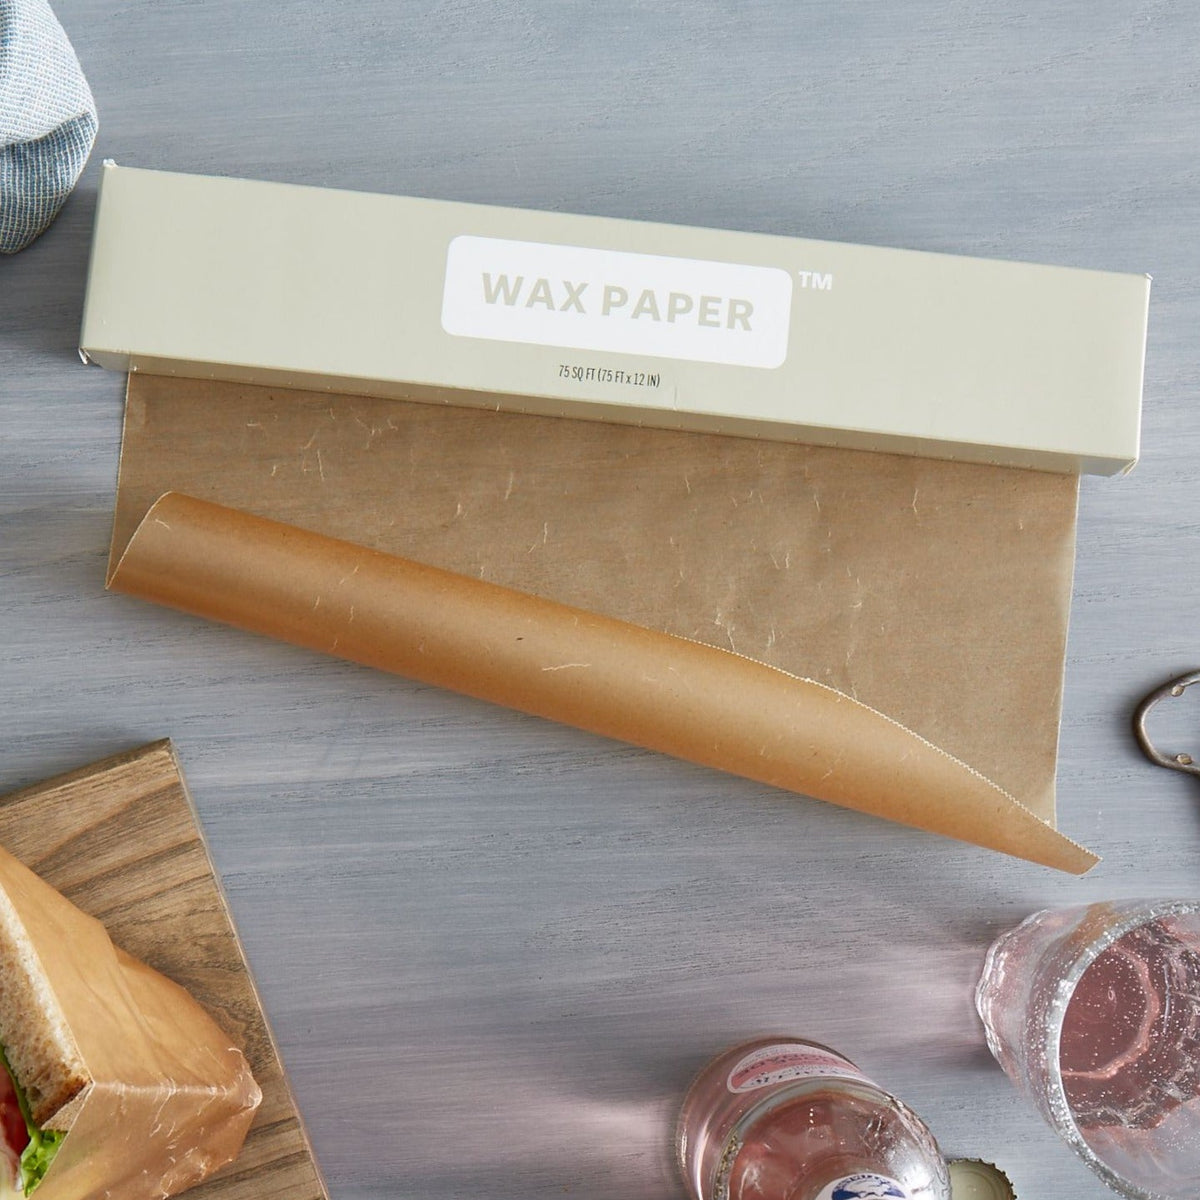 Lifestlye photo of wax paper being unrolled on a kitchen counter next to sandwiches.